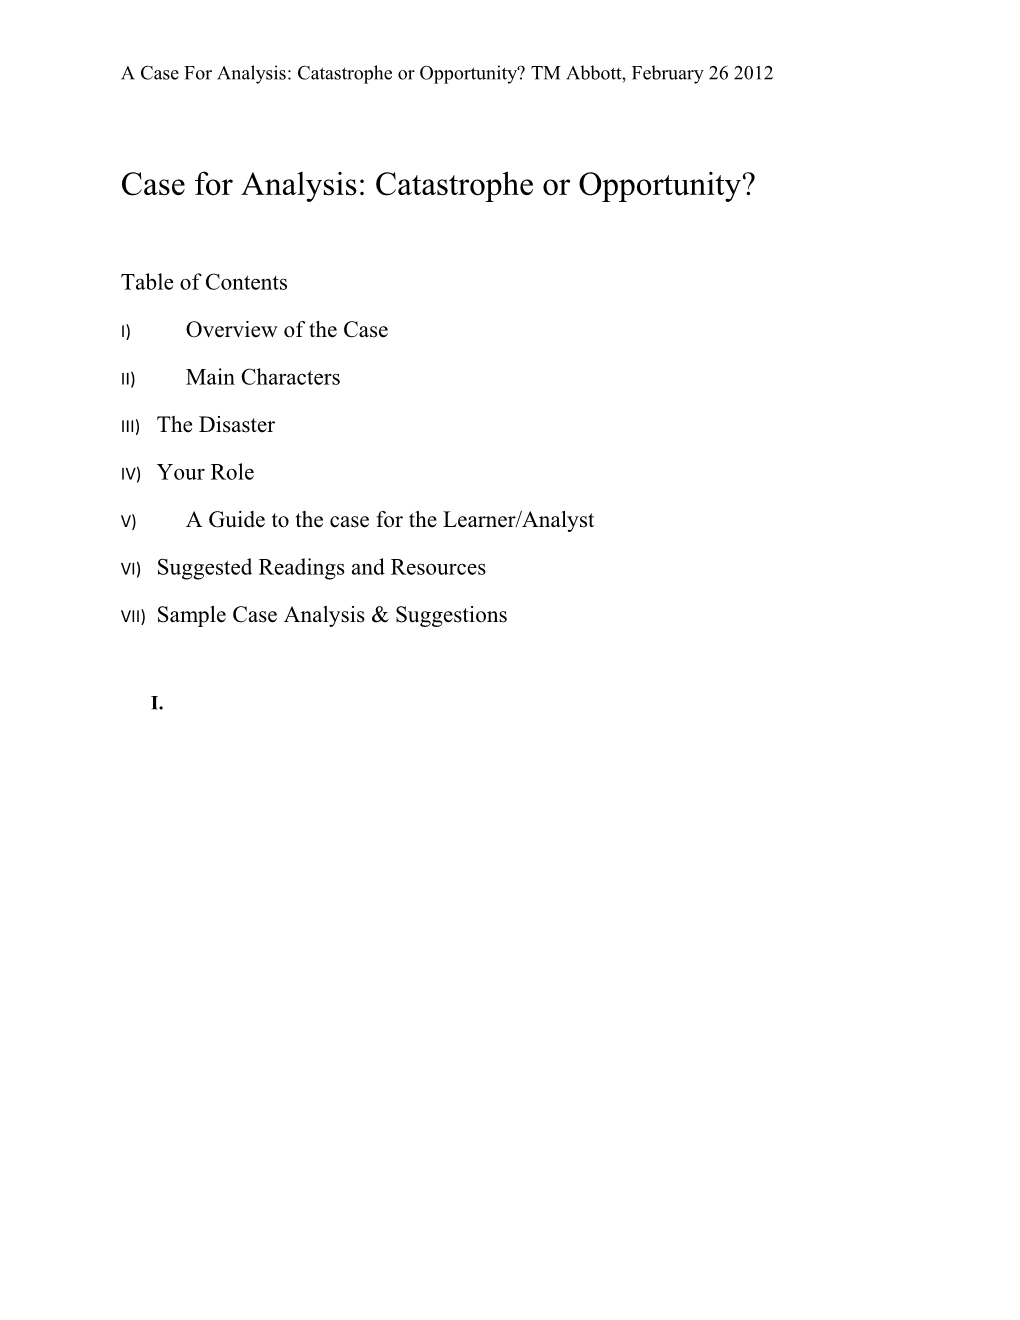 A Case for Analysis: Catastrophe Or Opportunity?